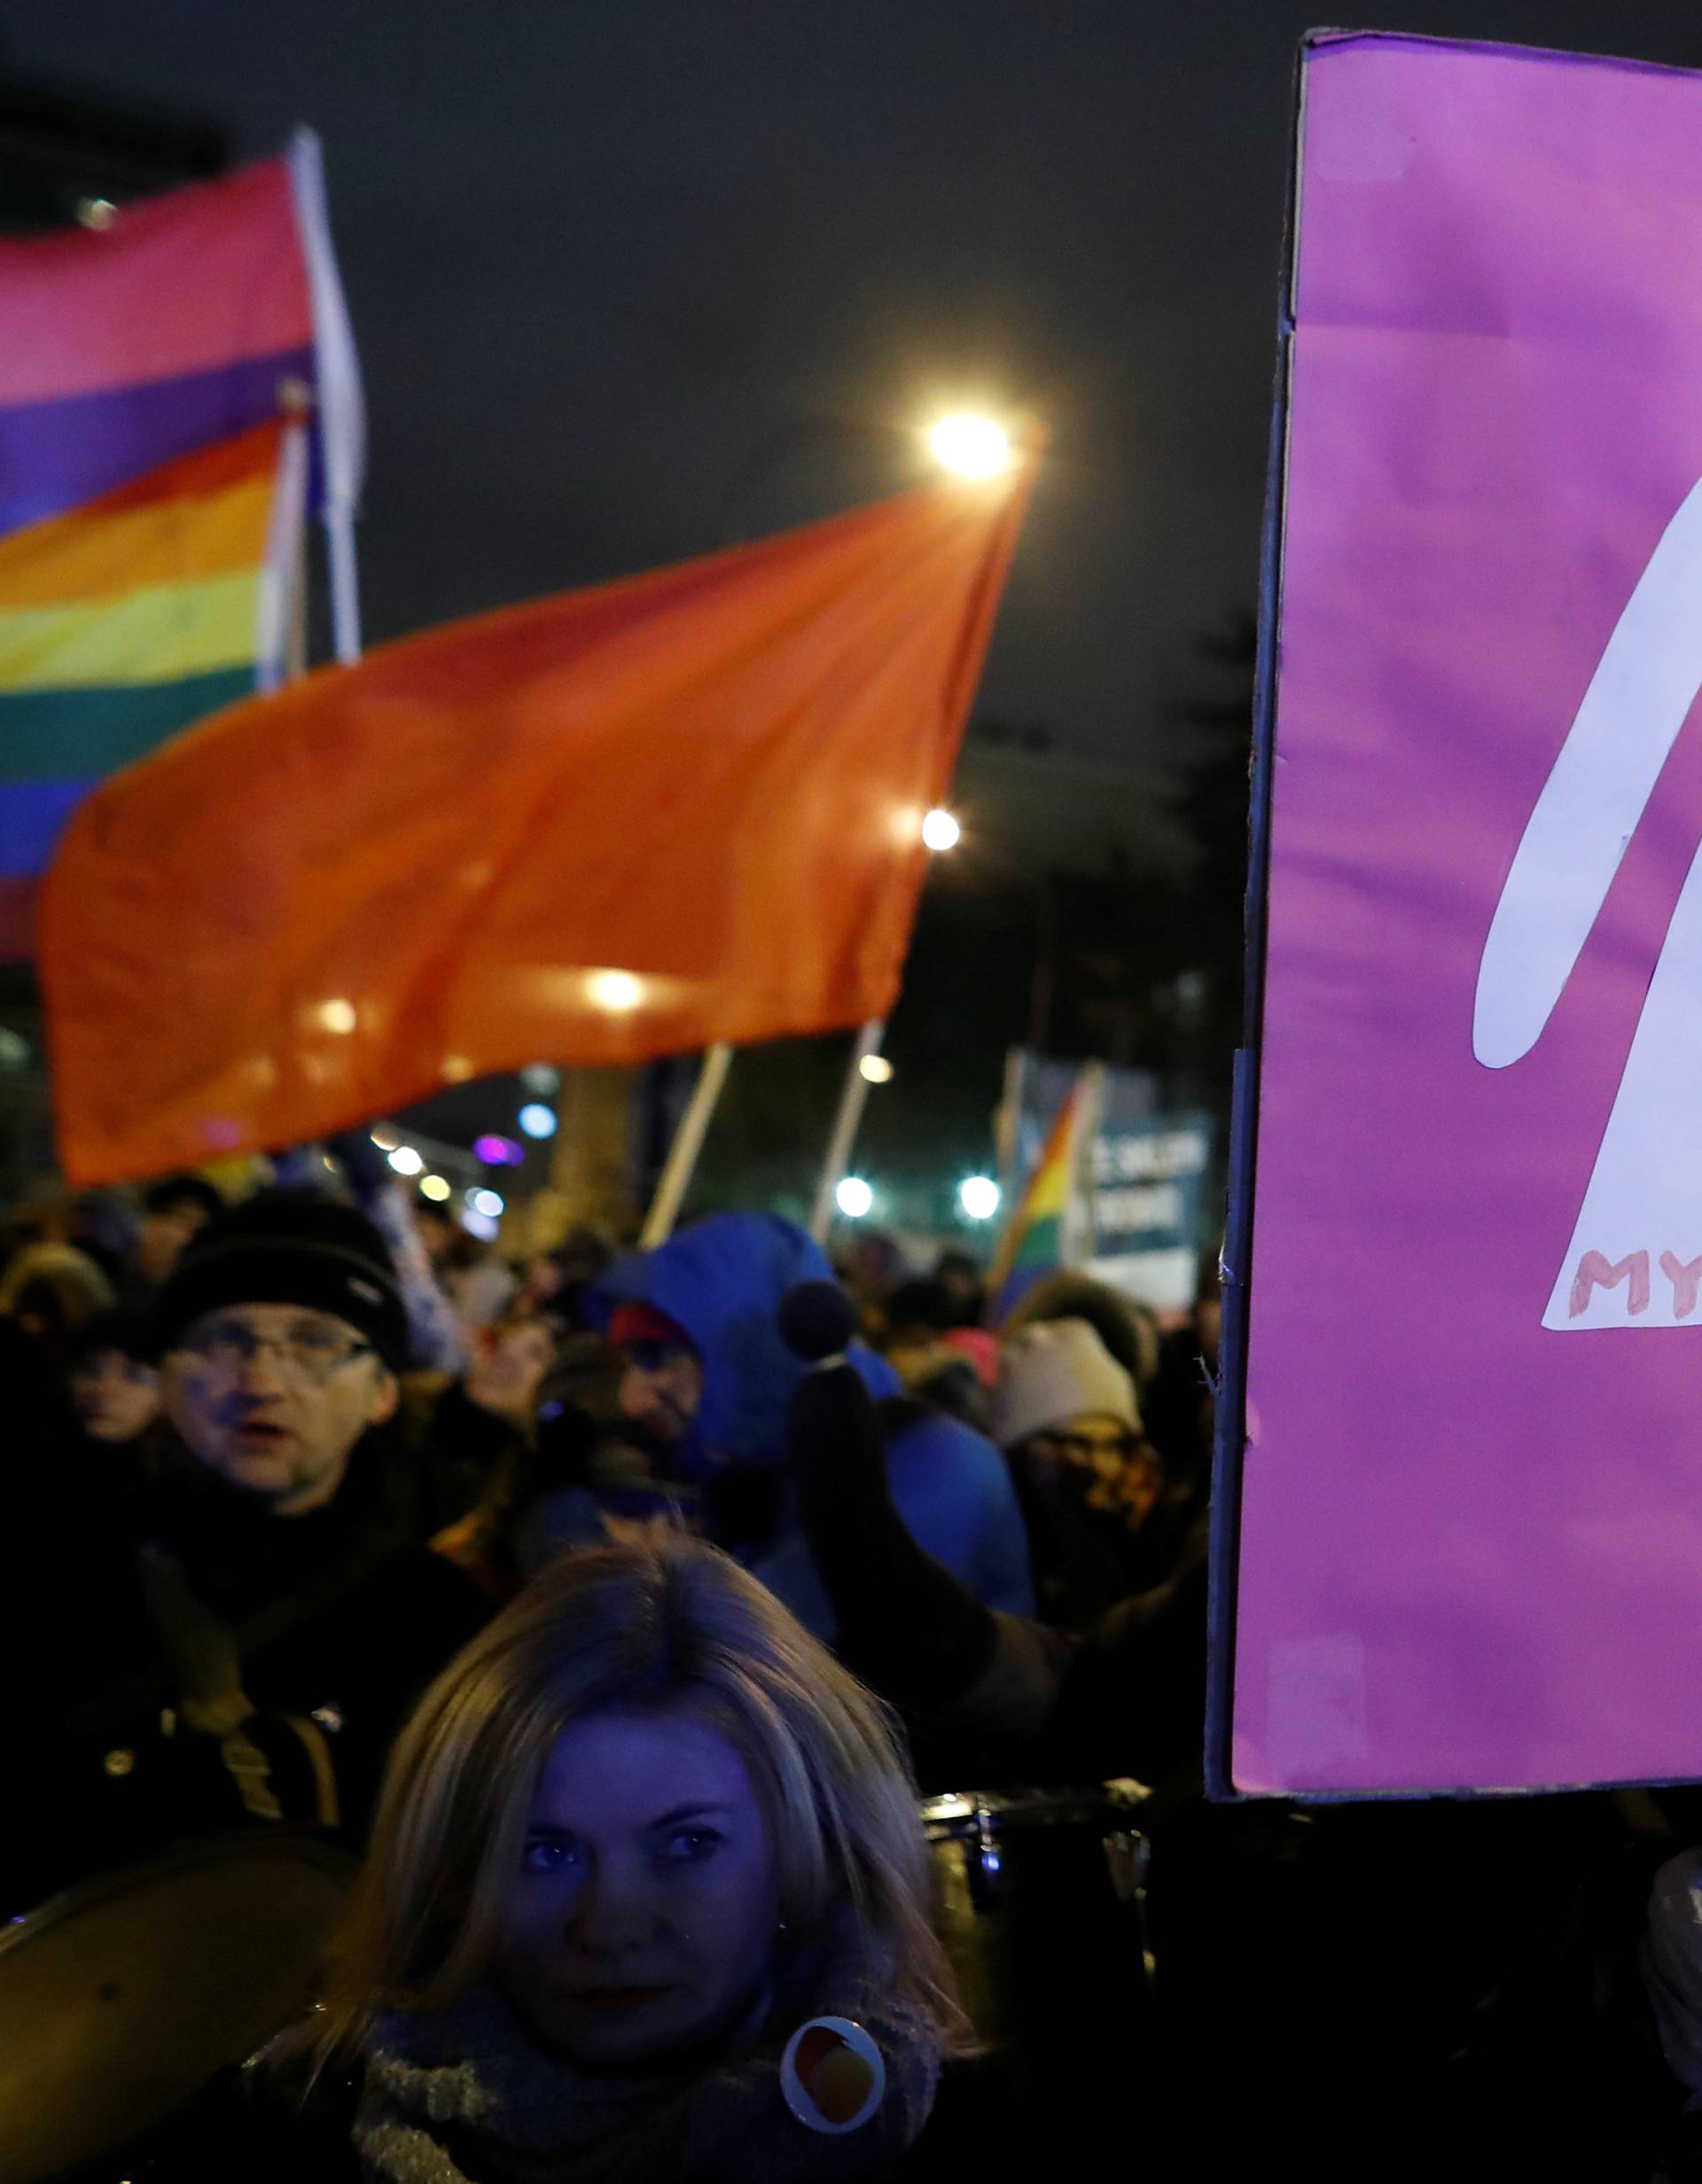 People gather to protest against plans to further restrict abortion laws in front of the Parliament in Warsaw